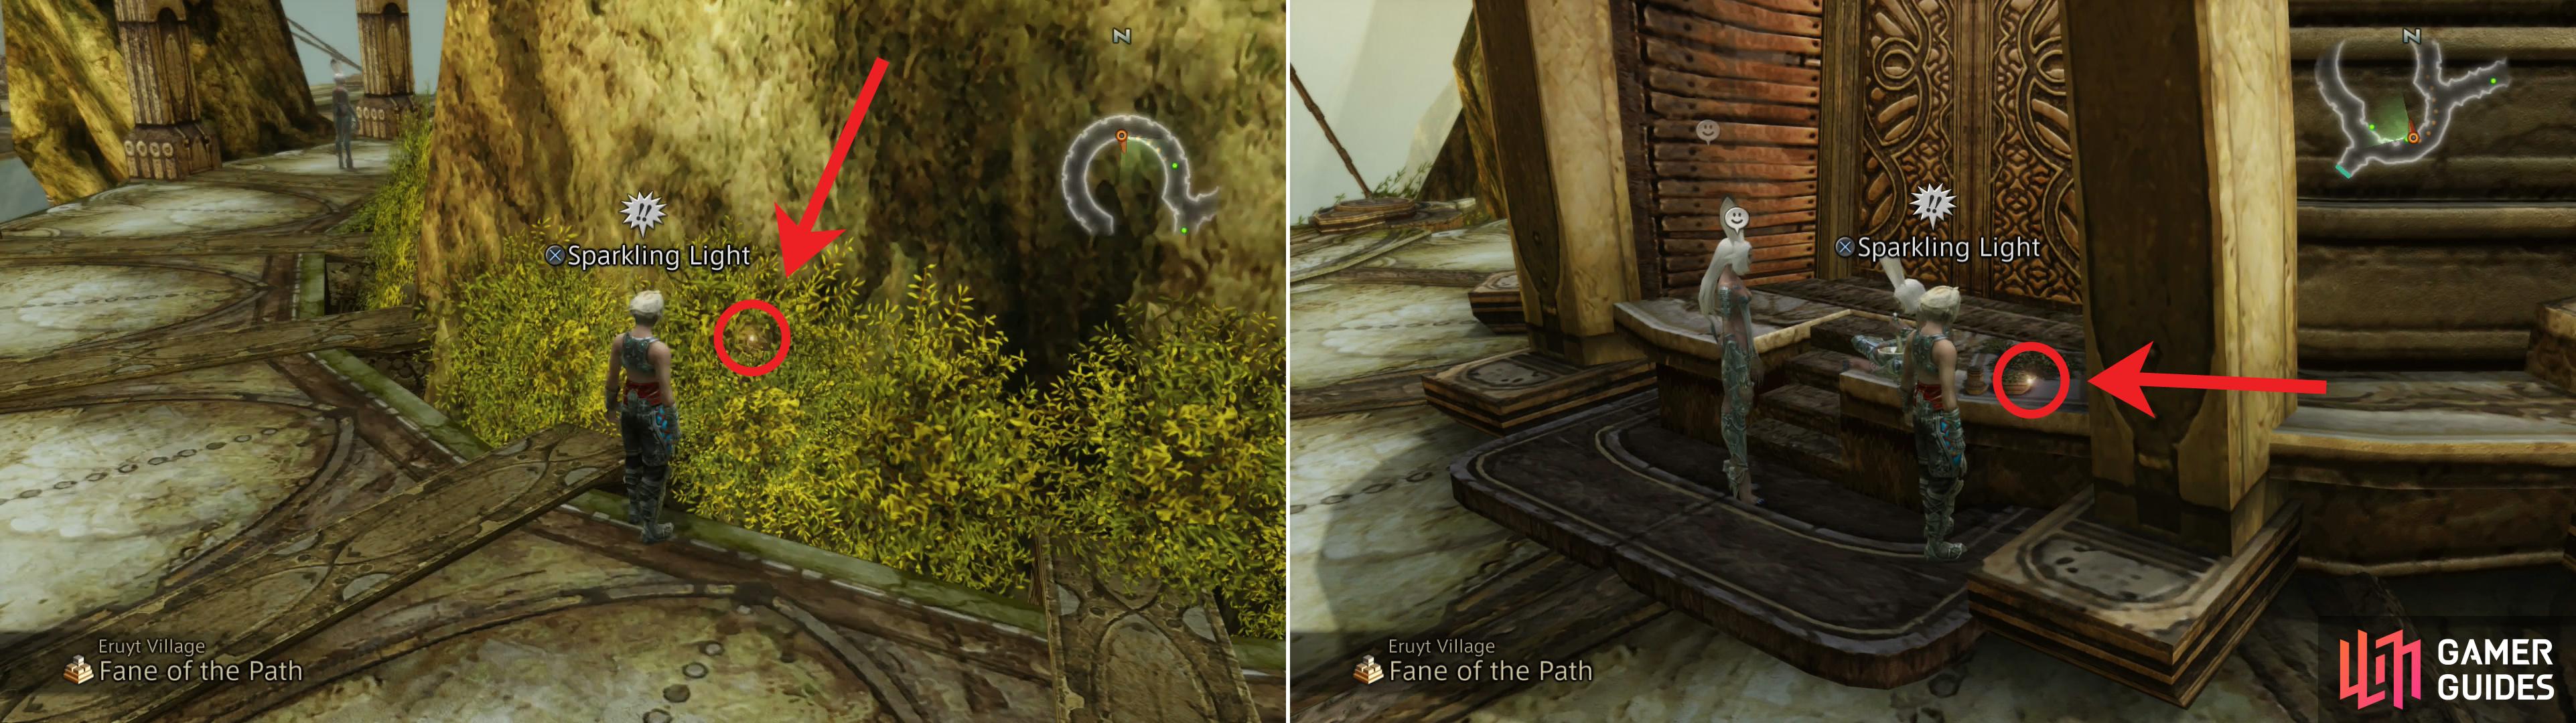 One Dewdrop pebble can be found in some moss (left) while another can be found near a Viera named Alja (right).